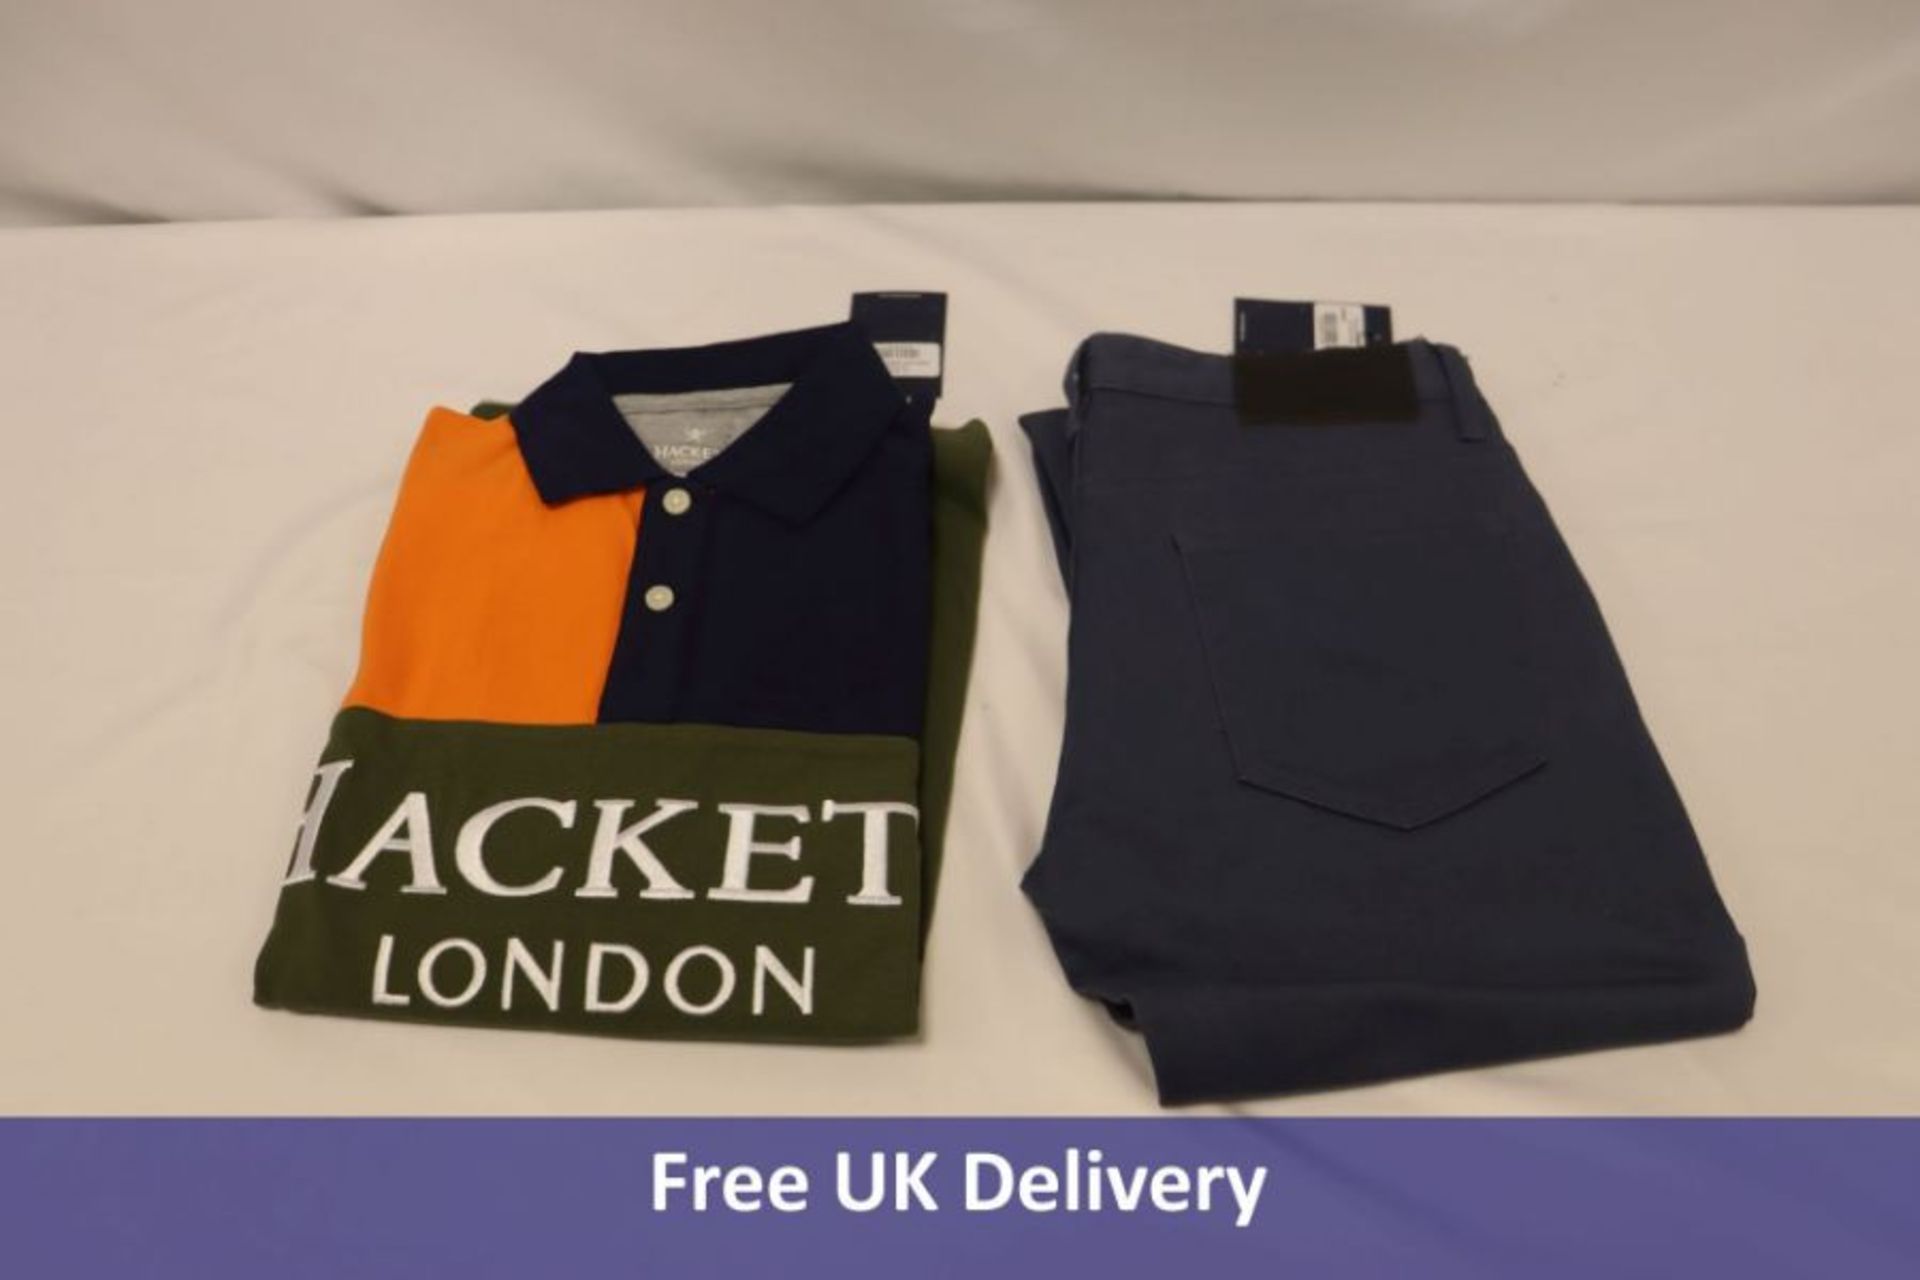 Six Hackett London to include 1x Parka Toggle Coat, Navy, 31/14yrs, 2x Ling Sleeve Tops, 13/14yrs, 1